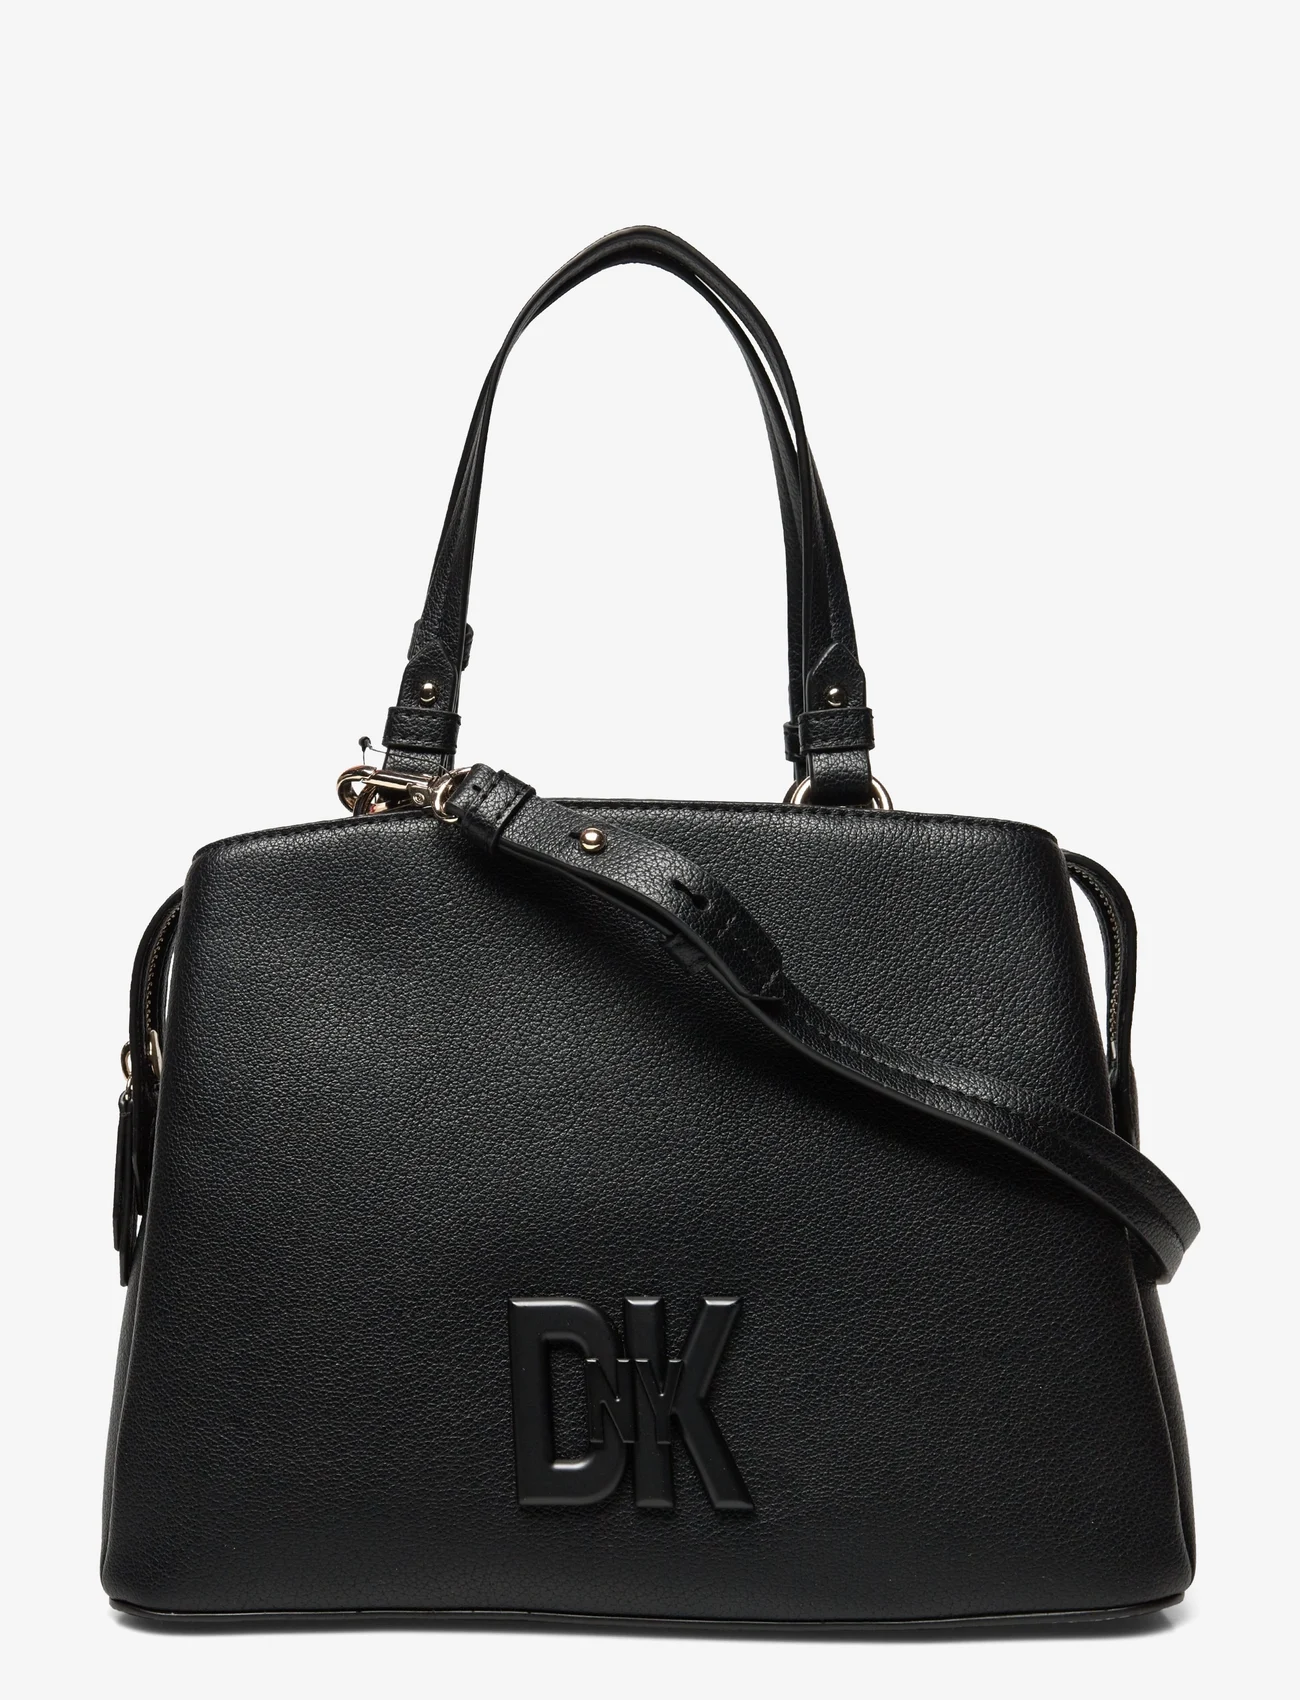 DKNY Bags - SEVENTH AVENUE MD SA - party wear at outlet prices - bbl - blk/black - 0